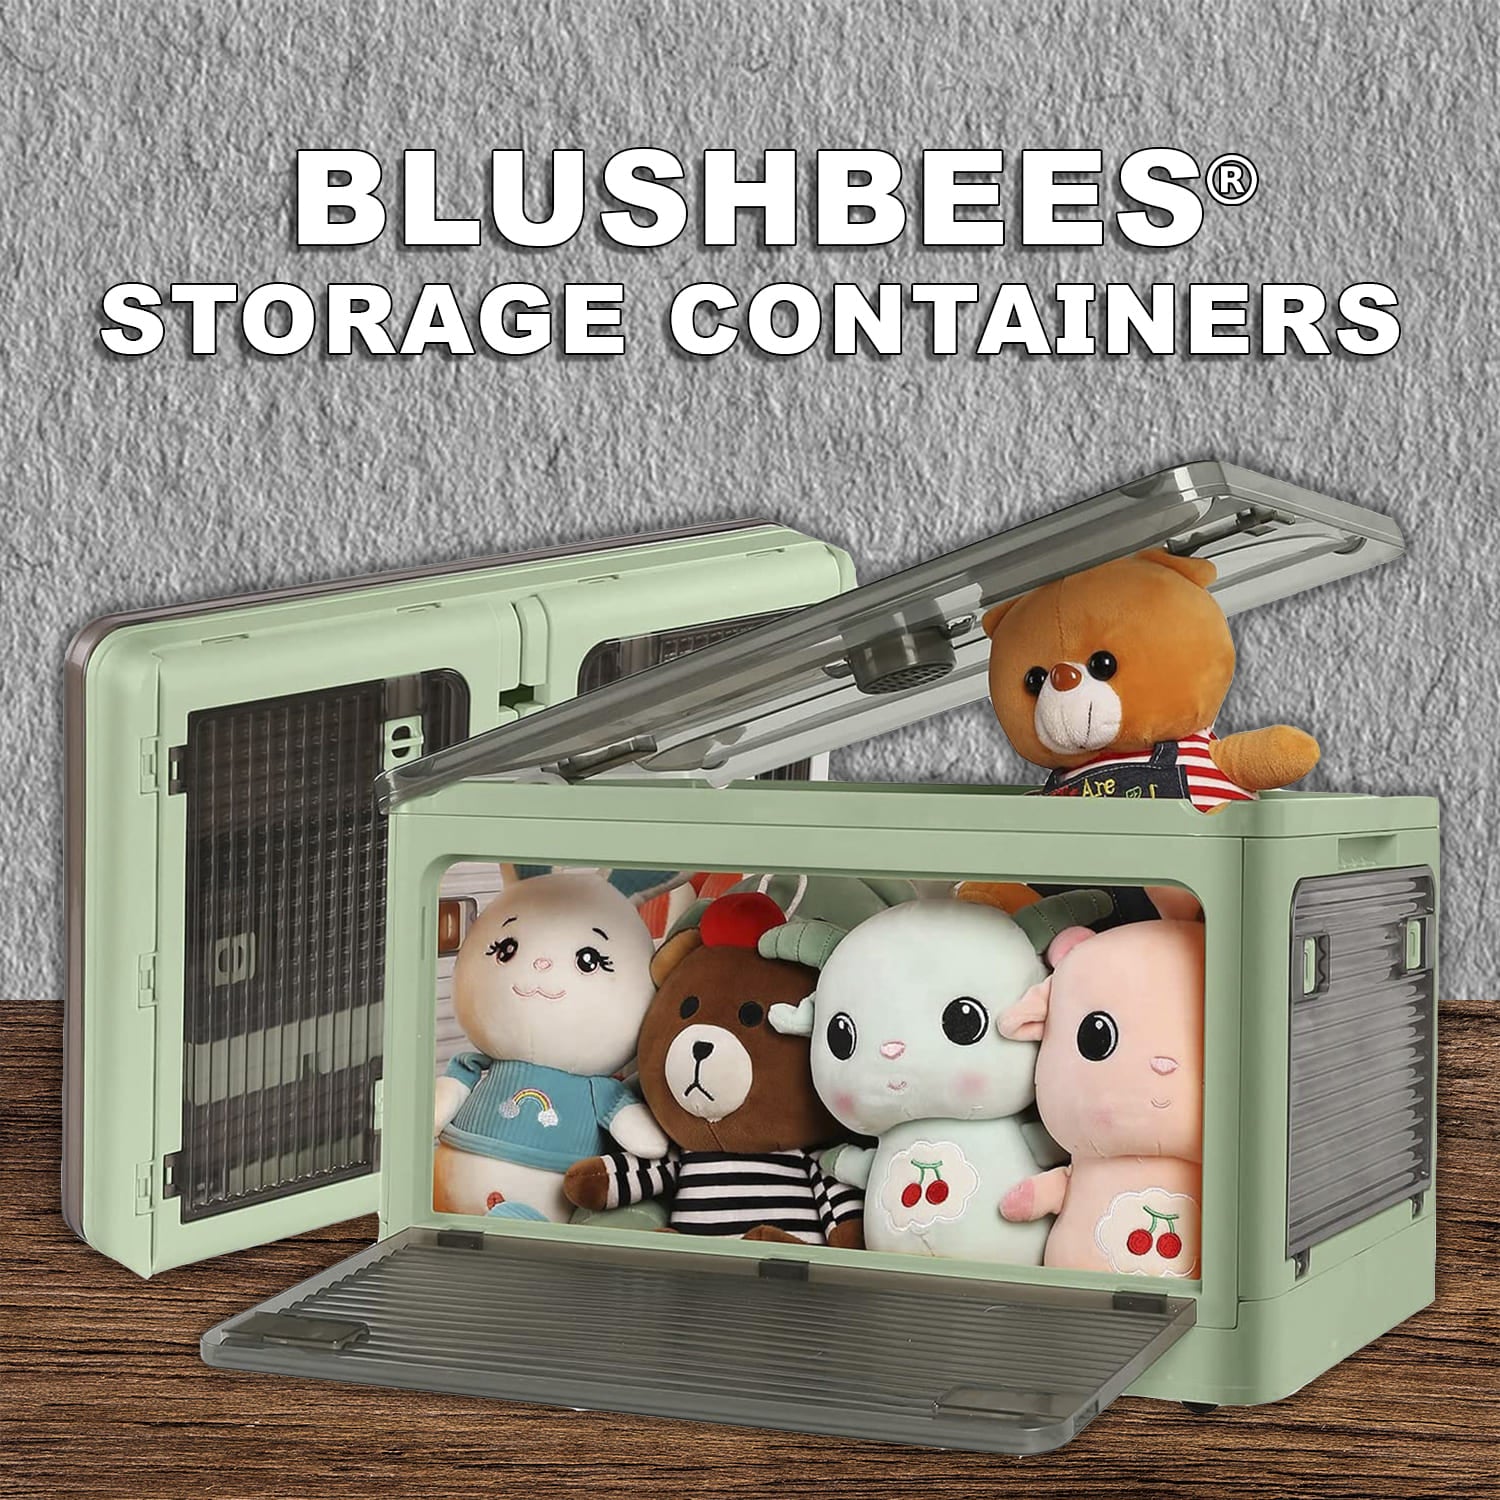 BlushBees® Storage Containers, For Clothes, Blankets, Kitchen Items, with 4 Wheels